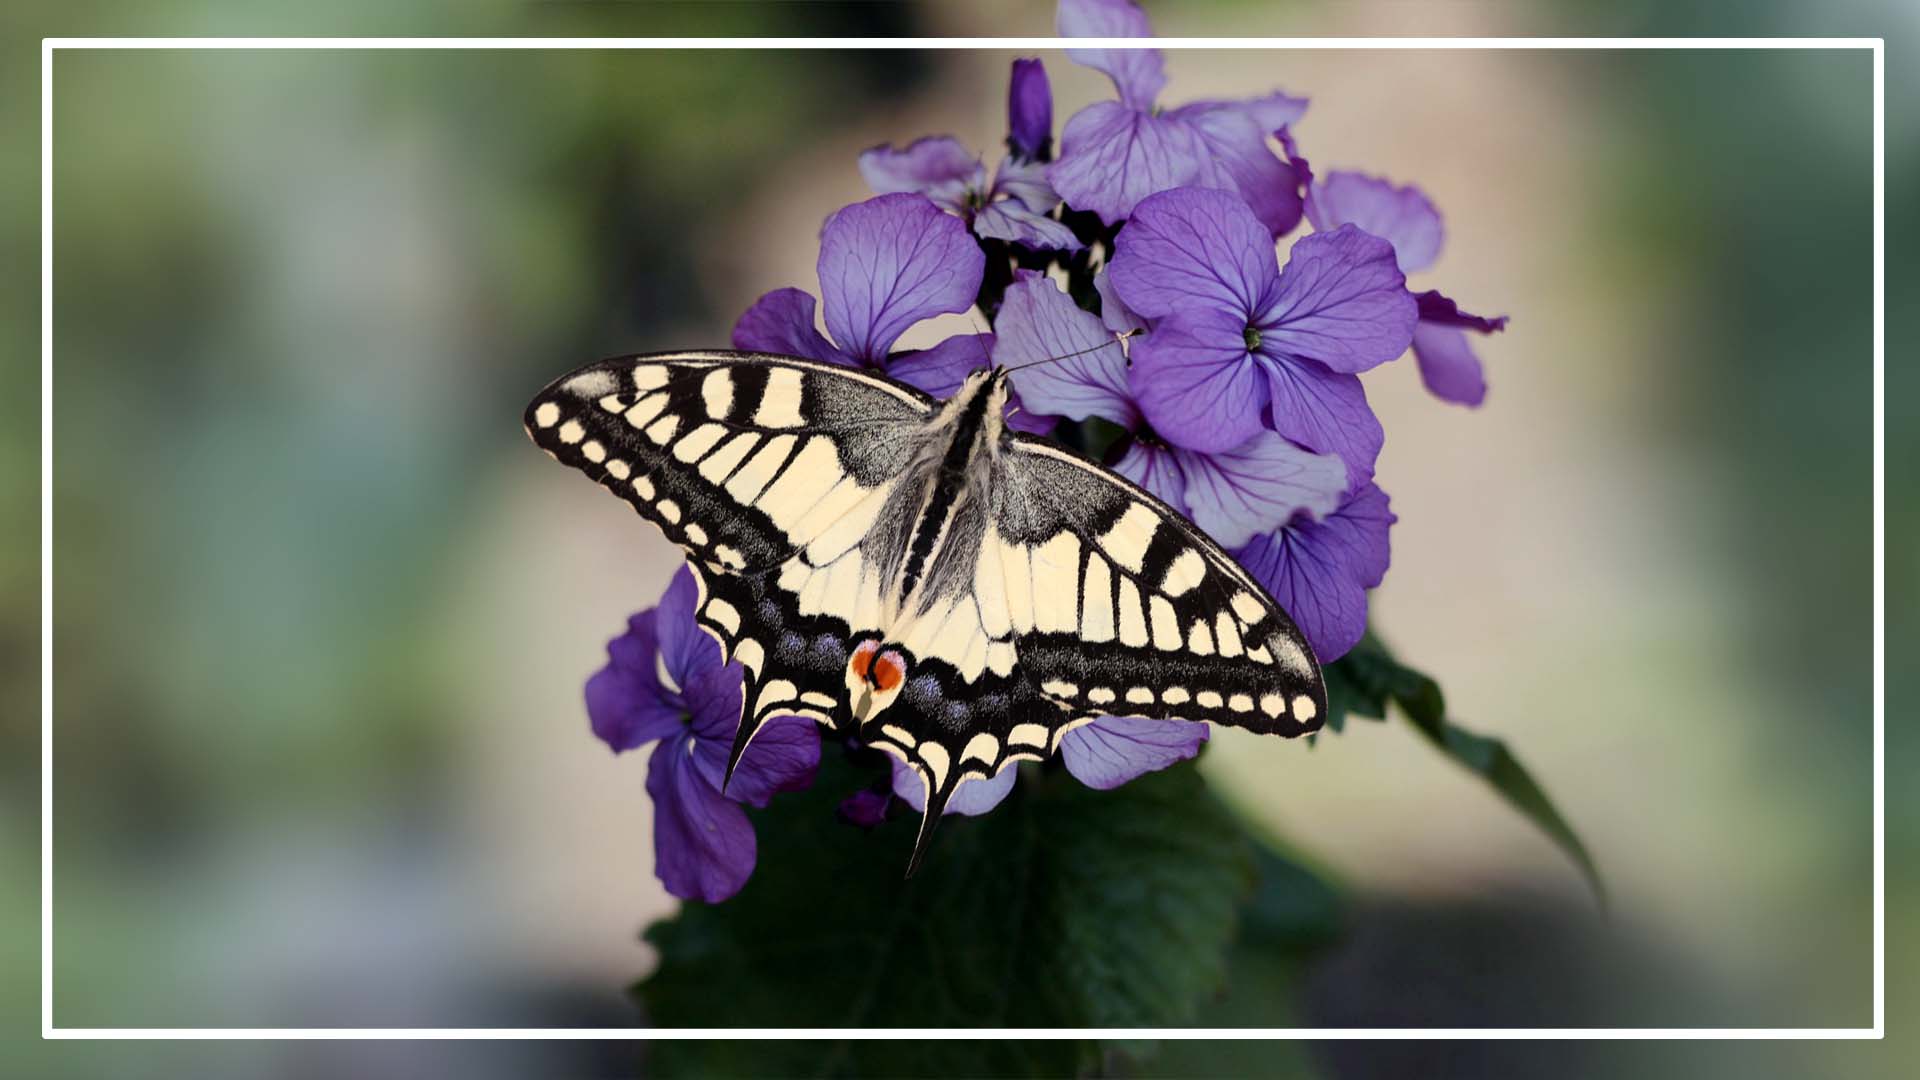 Swallowtail butterflies typically lay eggs during the warmer months of spring and summer.